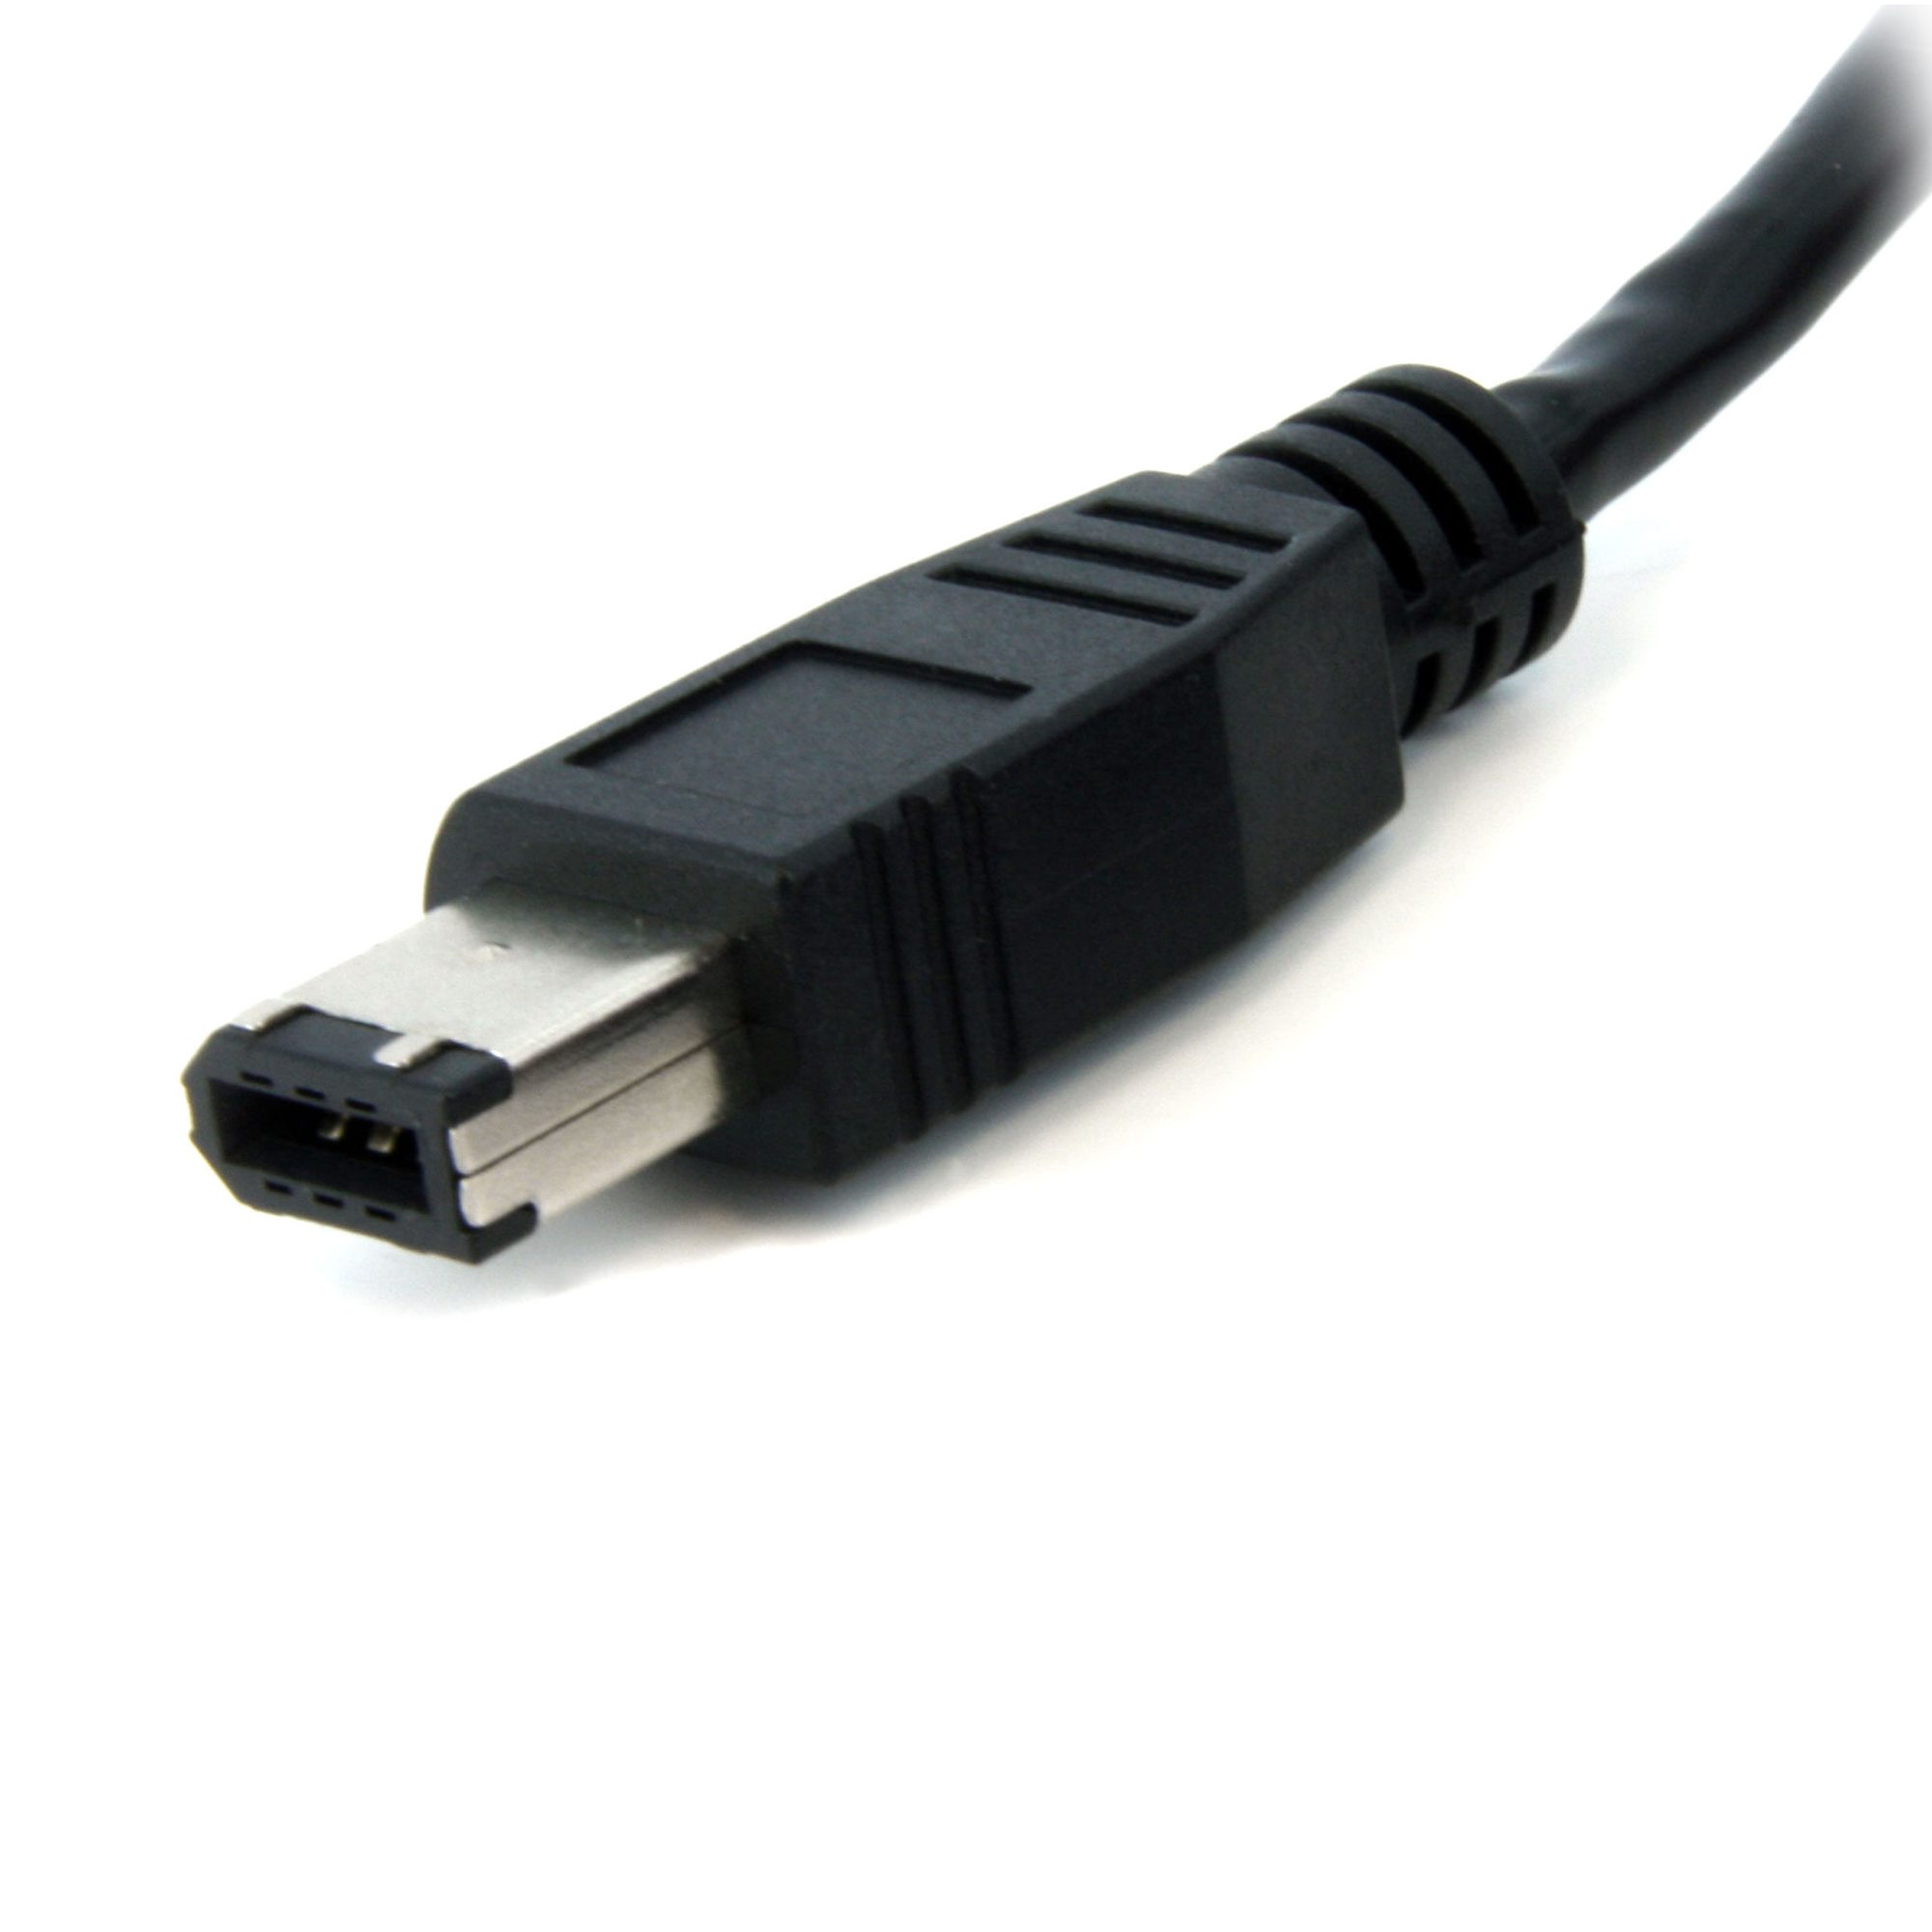 1 ft IEEE-1394 Firewire Cable 4-6 M/M FireWire 400 Cables